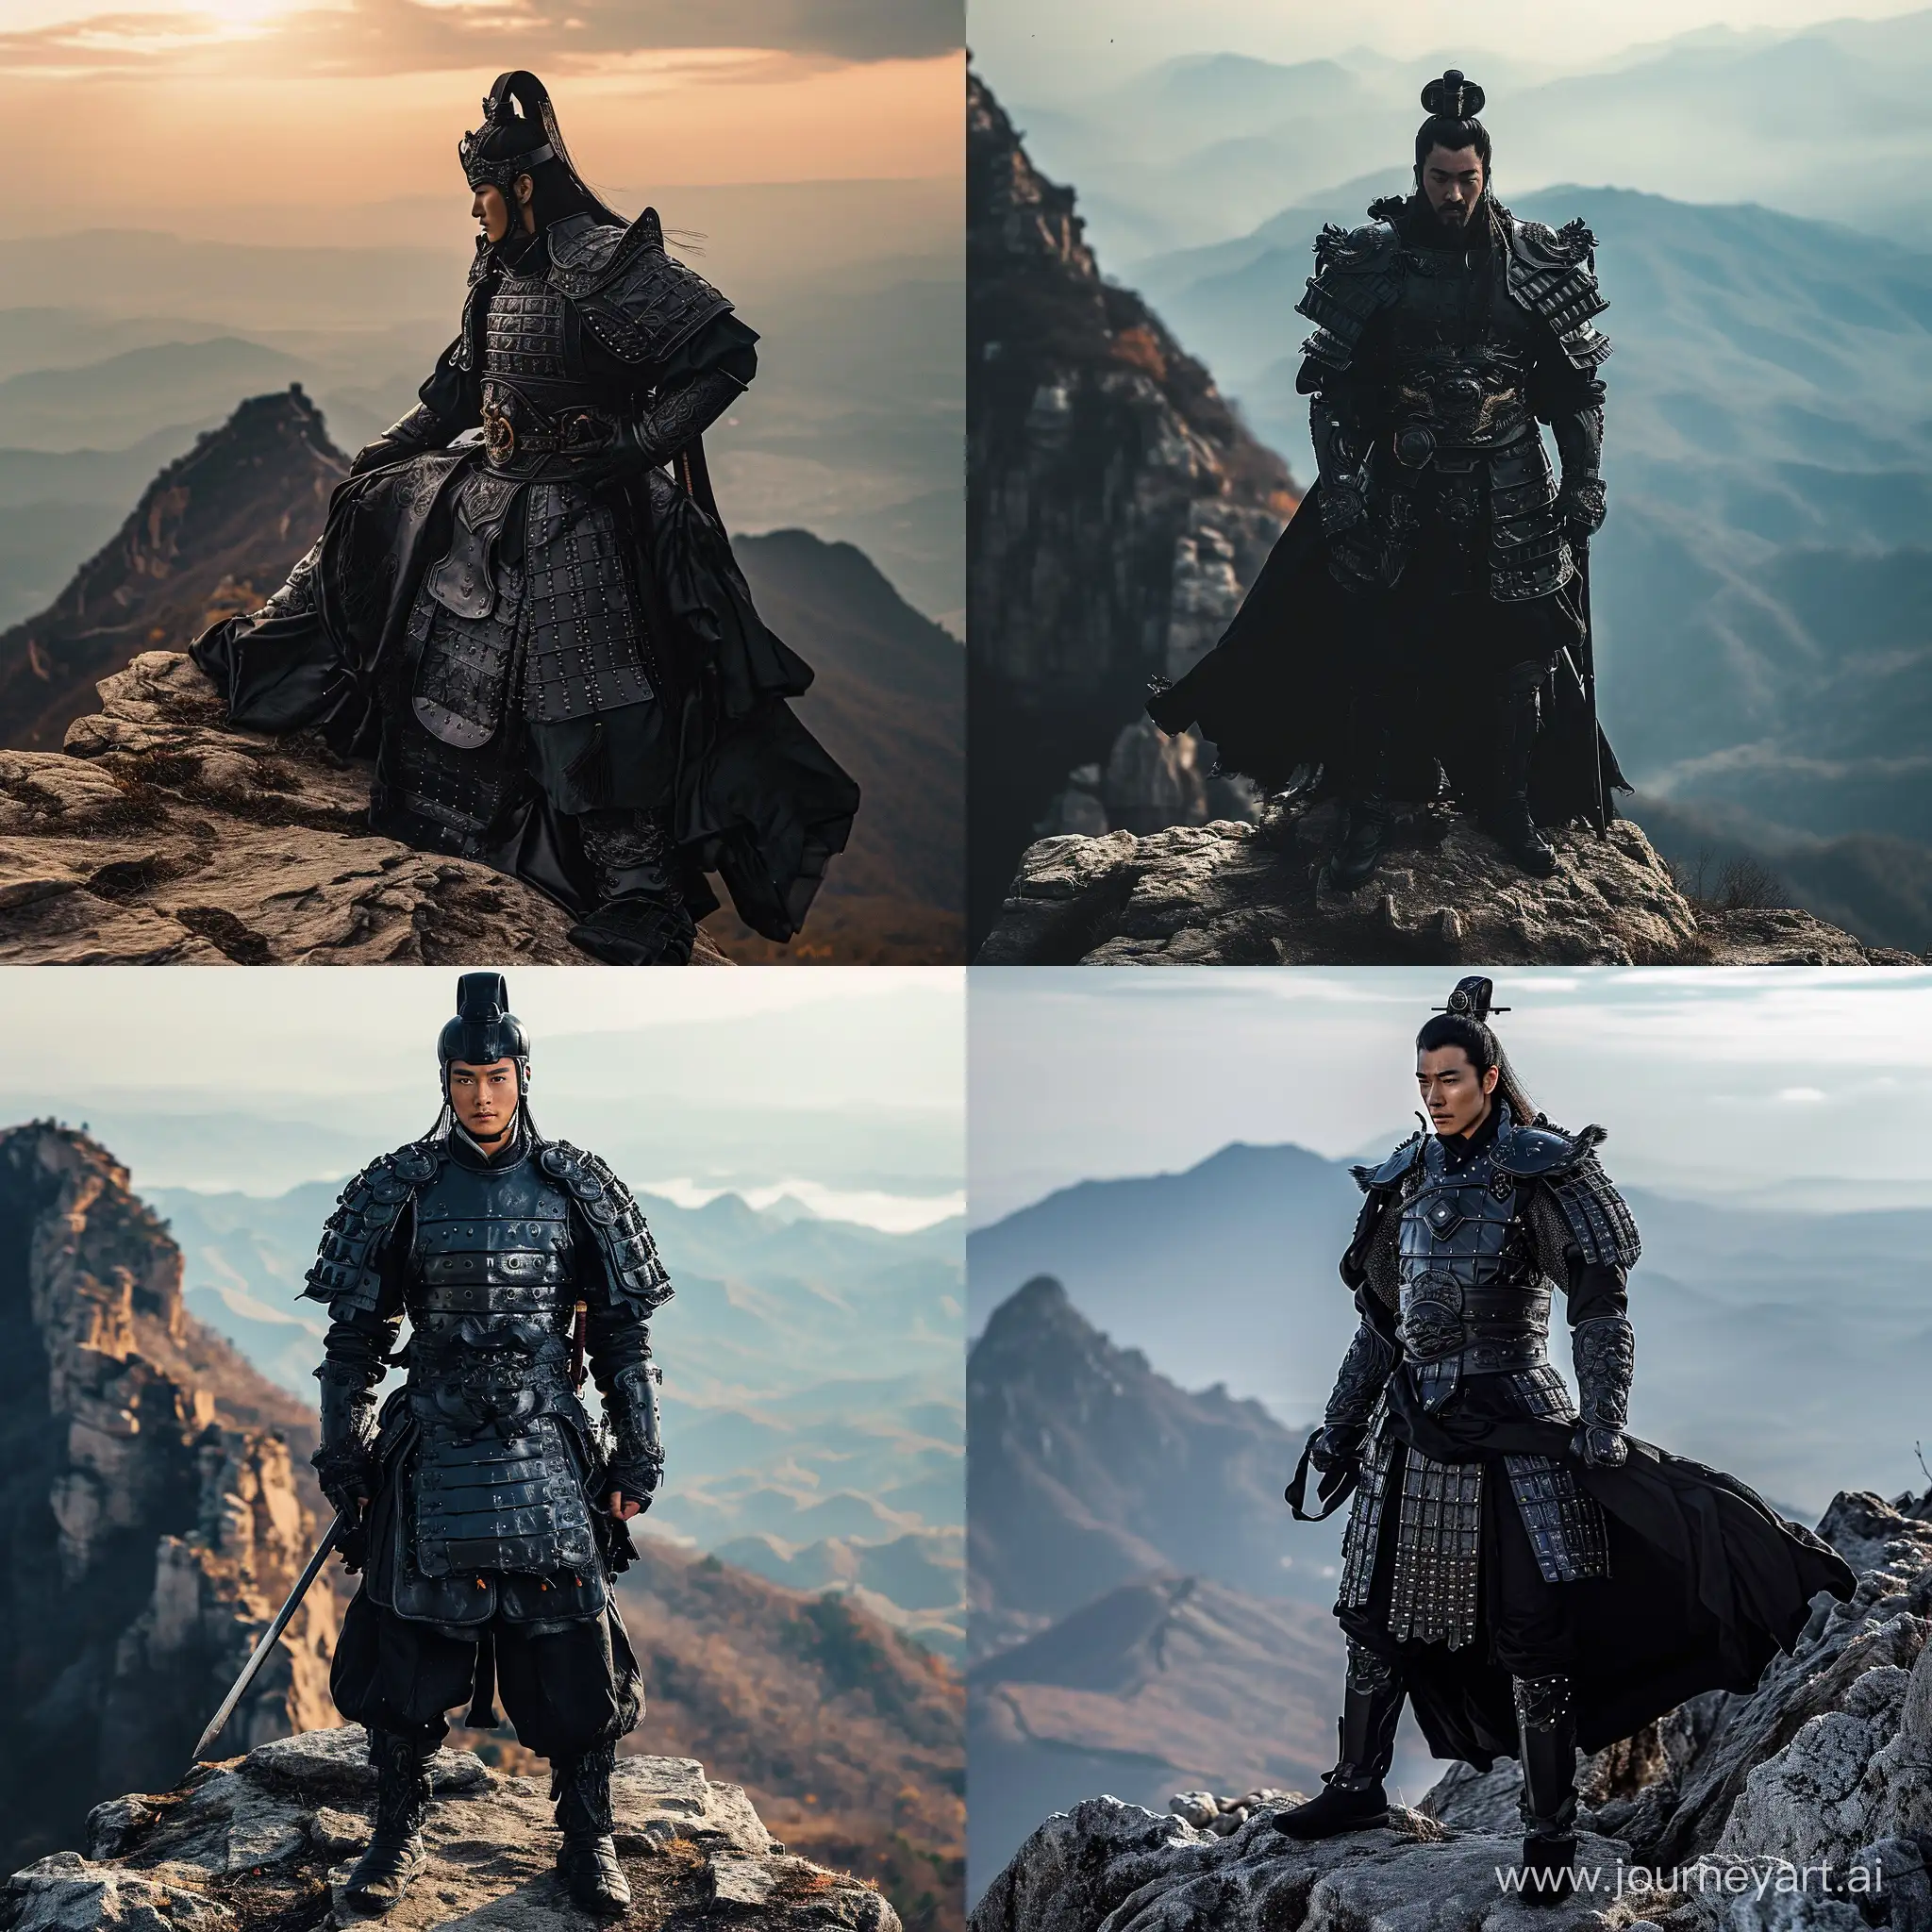 Chinese-General-in-Black-Armor-on-Mountain-Summit